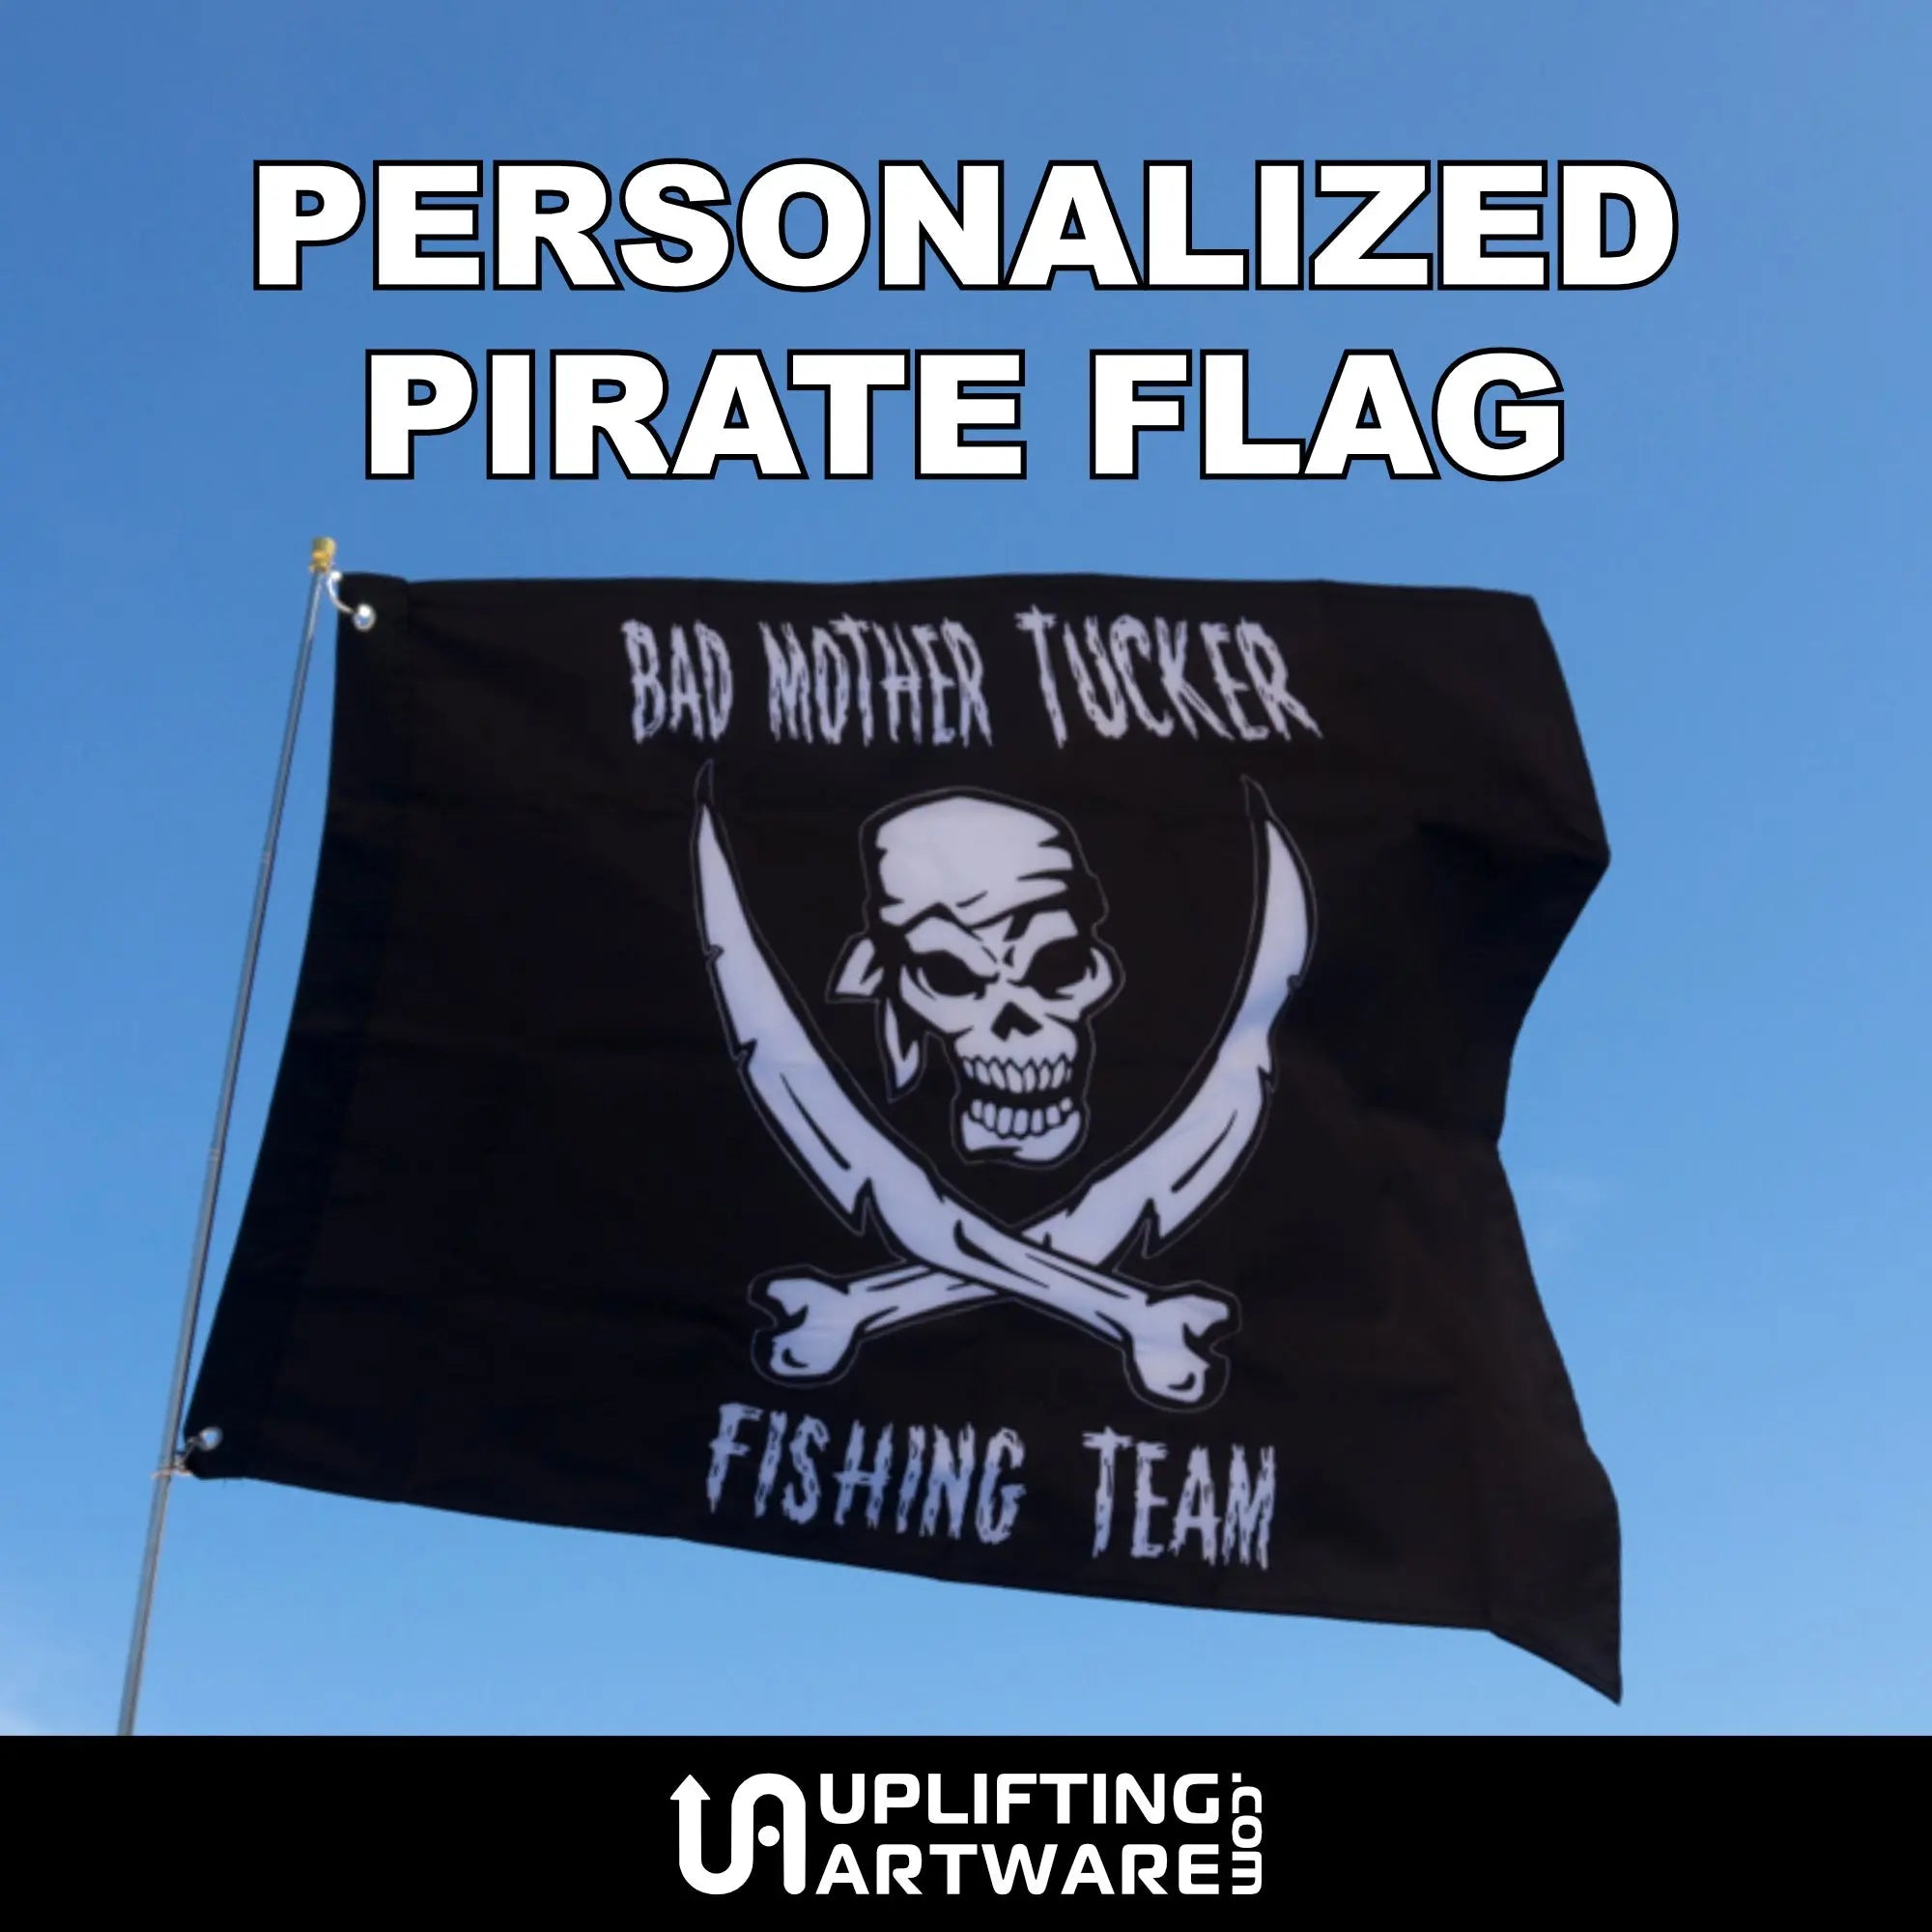 Personalized Pirate Flag made specifically for you – Uplifting Artware